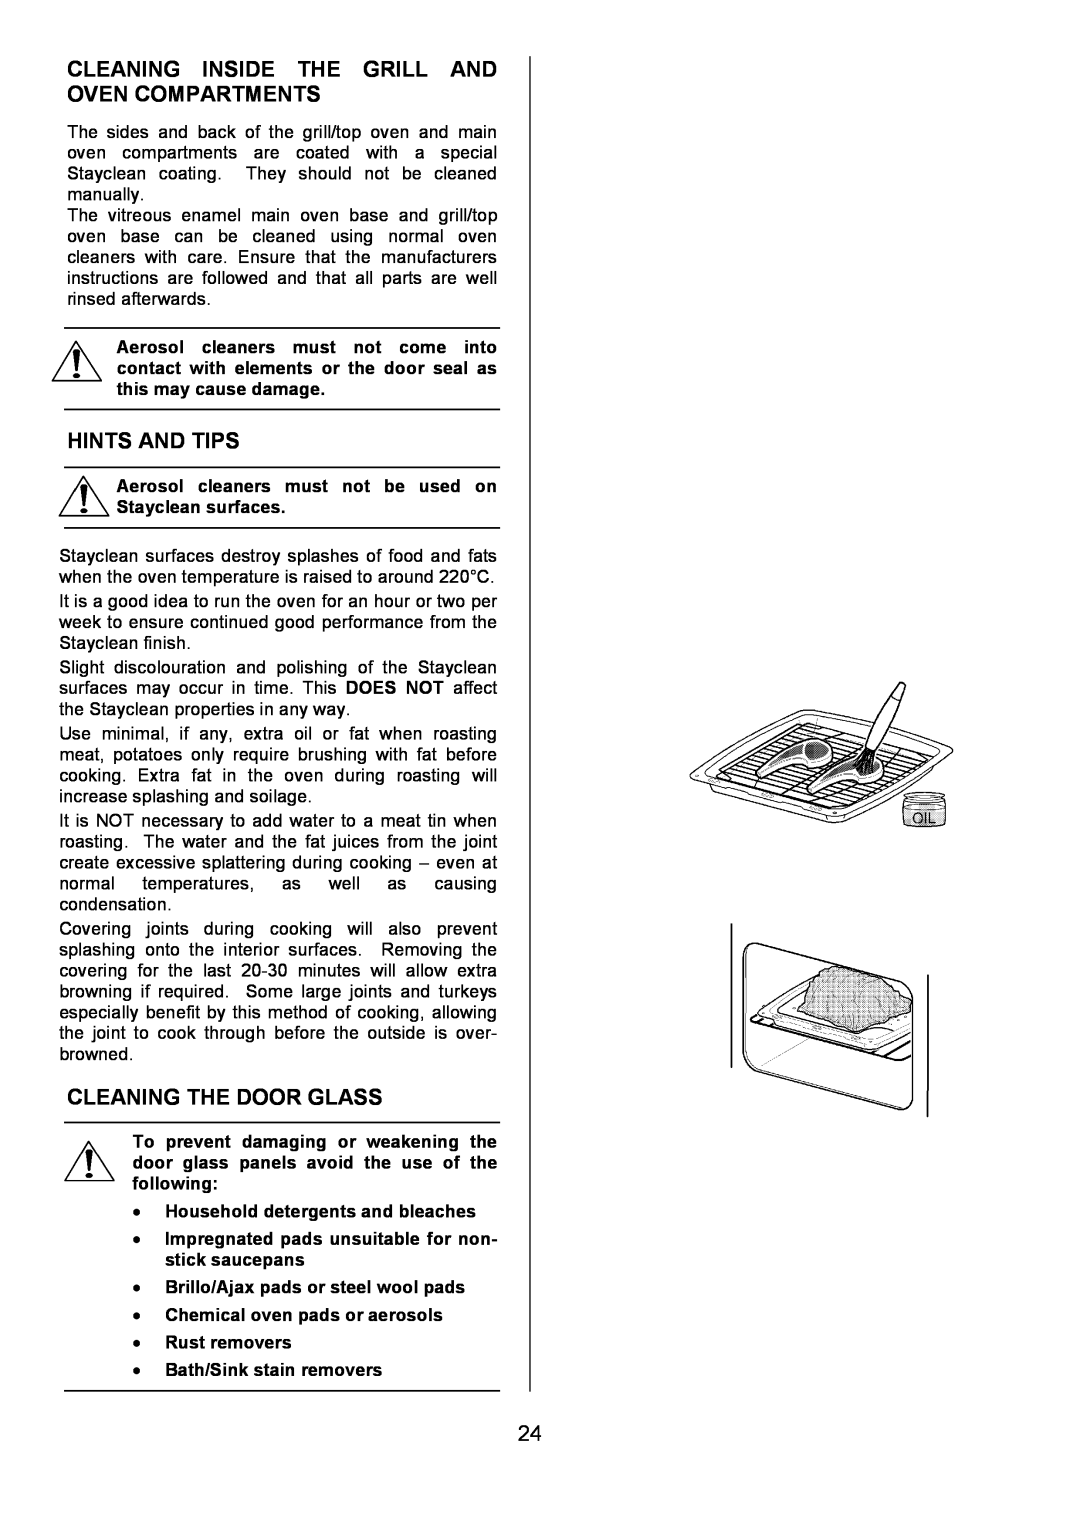 Zanussi ZCE 5001, ZCE 5000 manual Cleaning Inside The Grill And Oven Compartments, Cleaning The Door Glass, Hints And Tips 